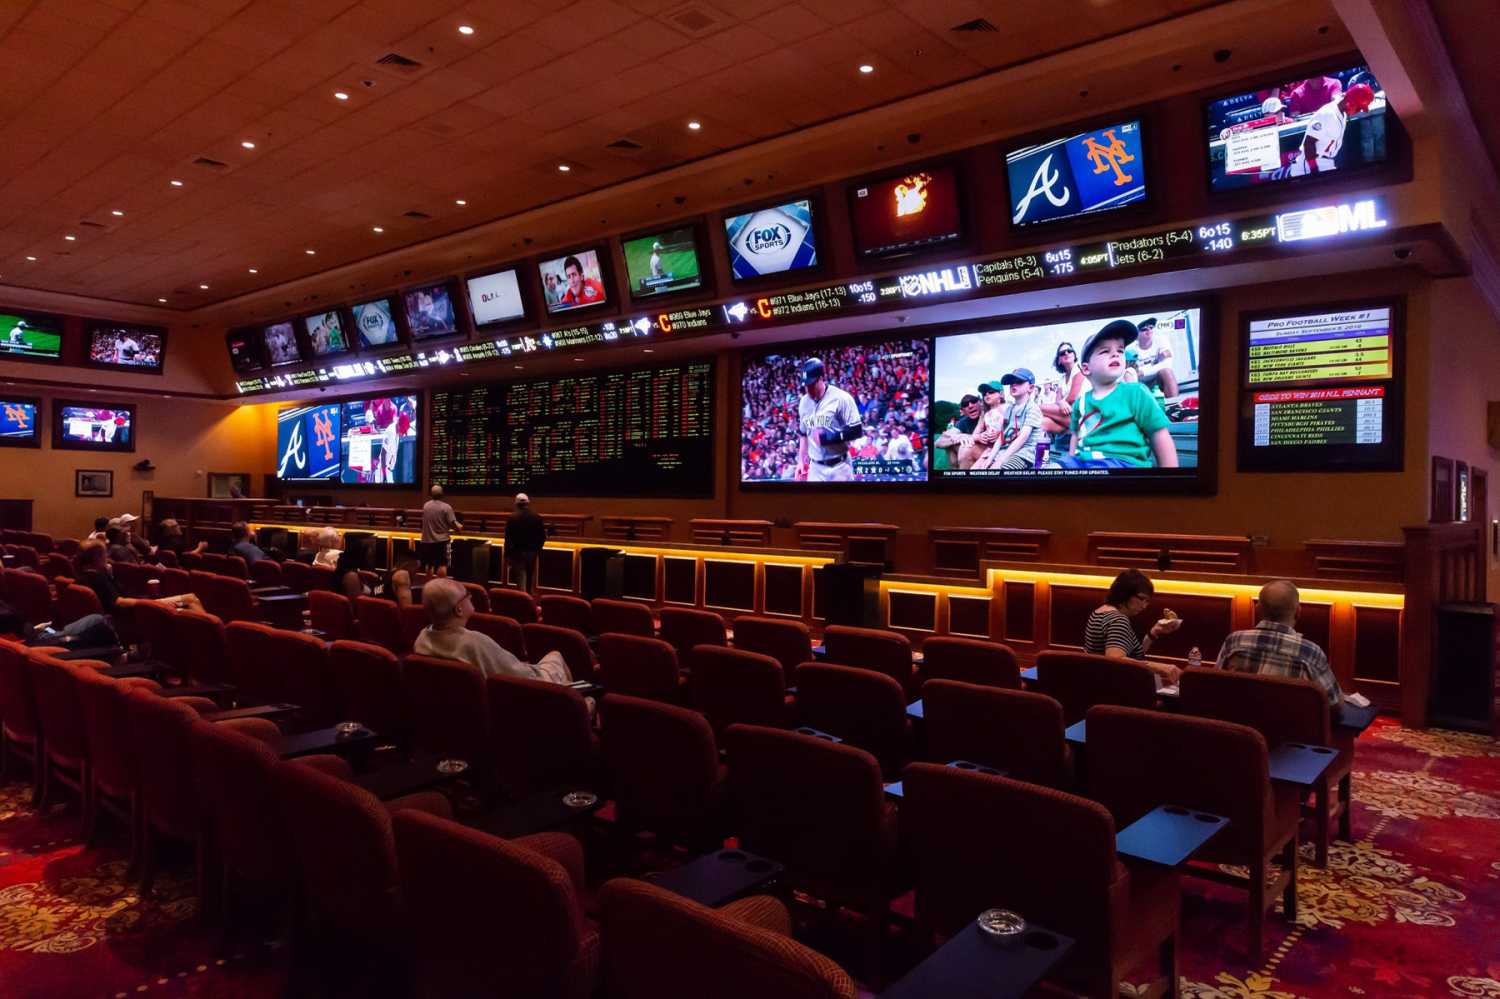 In the Sports Book LED displays are used to show bingo cards and property-wide ads during breaks